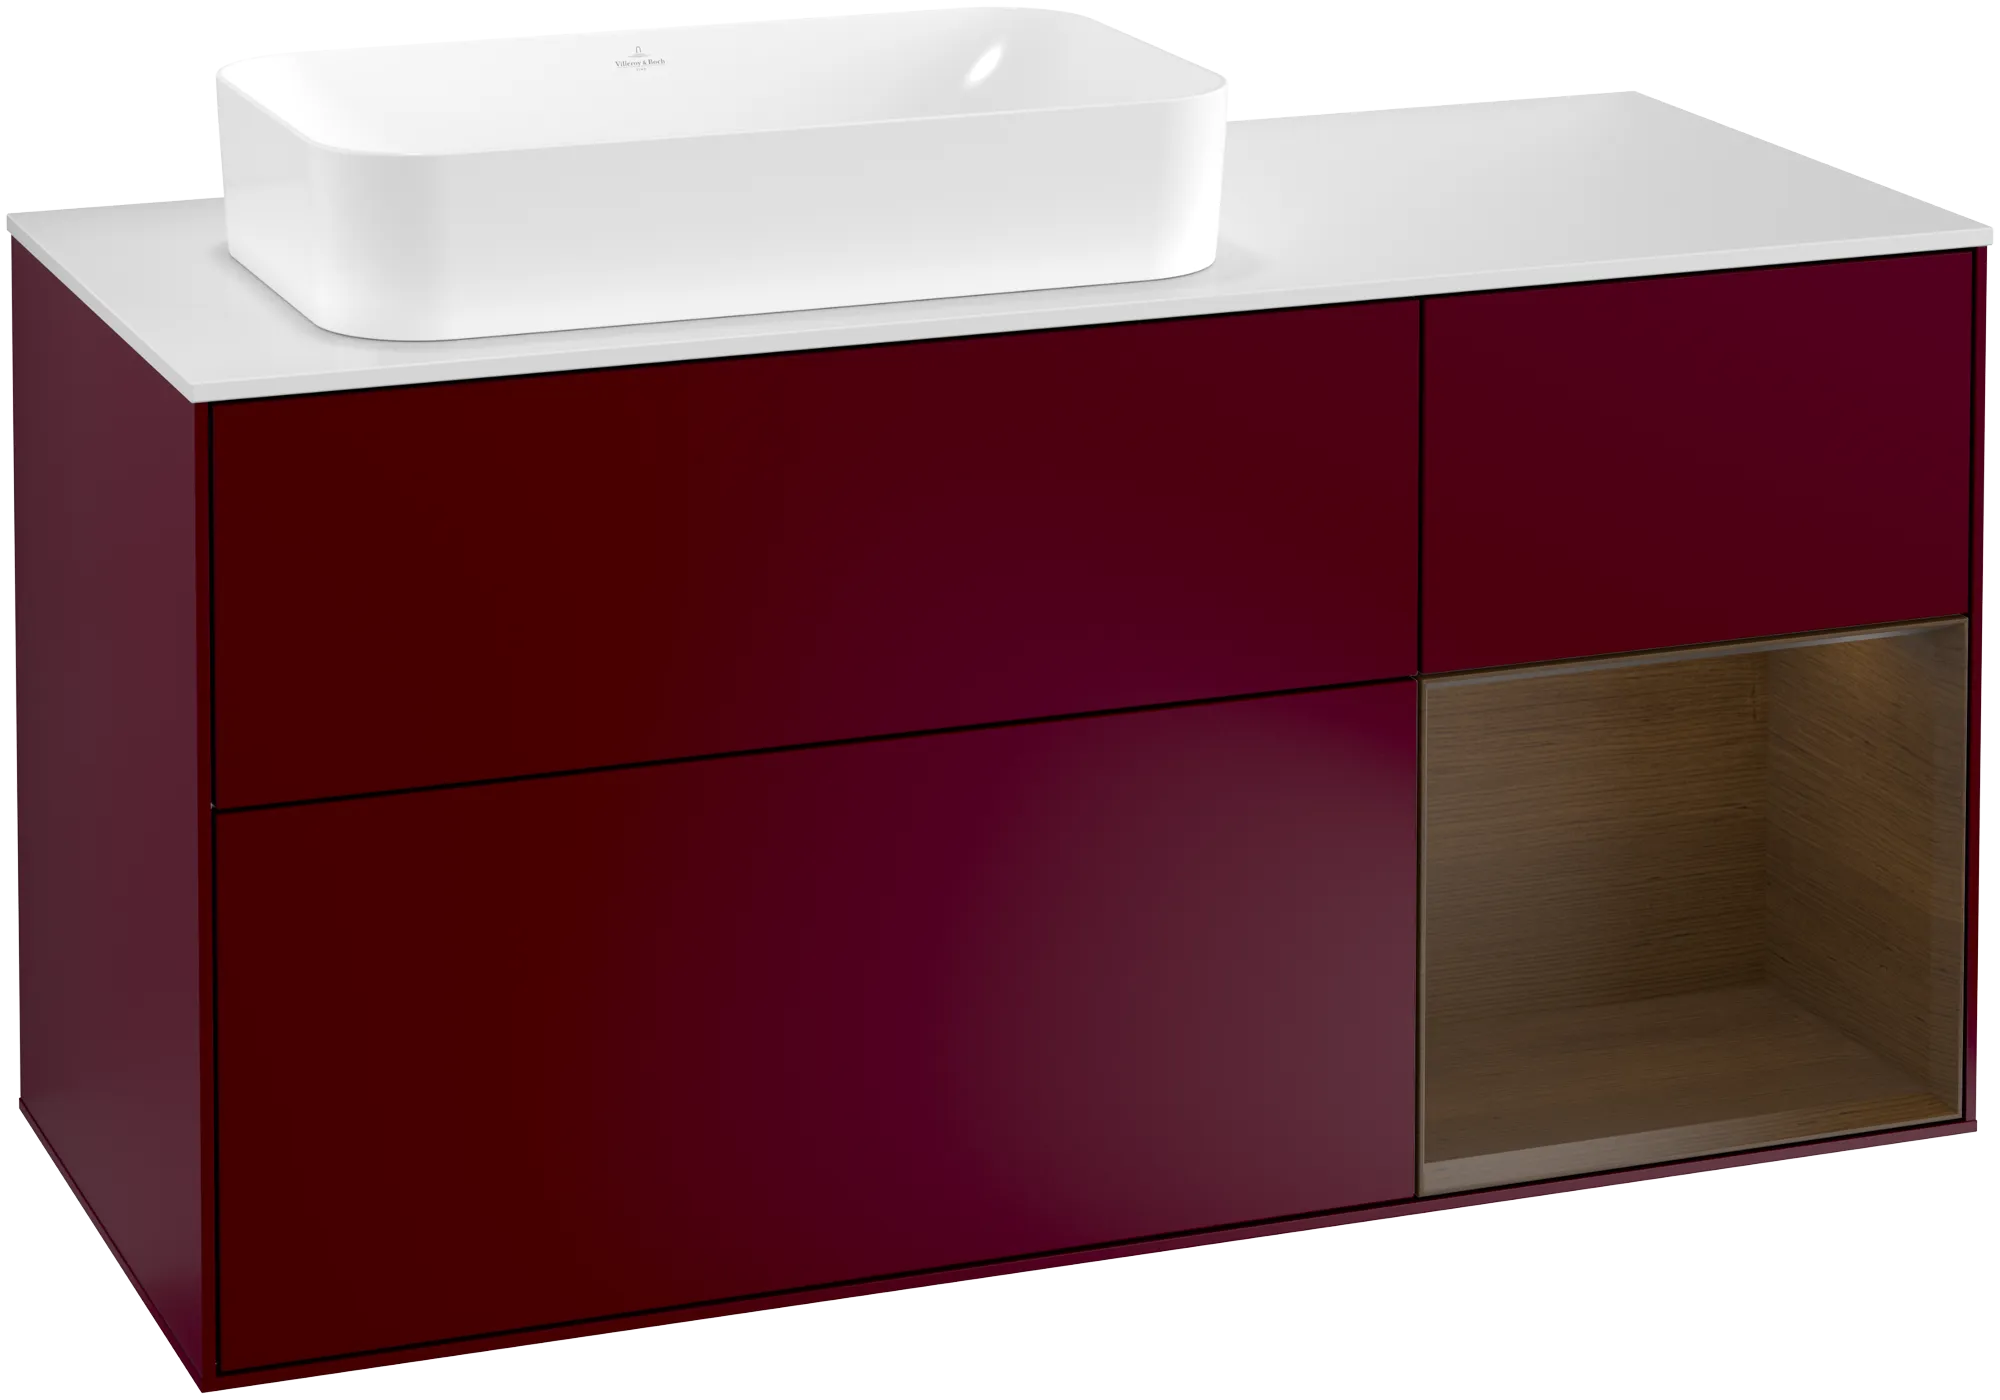 Picture of VILLEROY BOCH Finion Vanity unit, with lighting, 3 pull-out compartments, 1200 x 603 x 501 mm, Peony Matt Lacquer / Walnut Veneer / Glass White Matt #G281GNHB